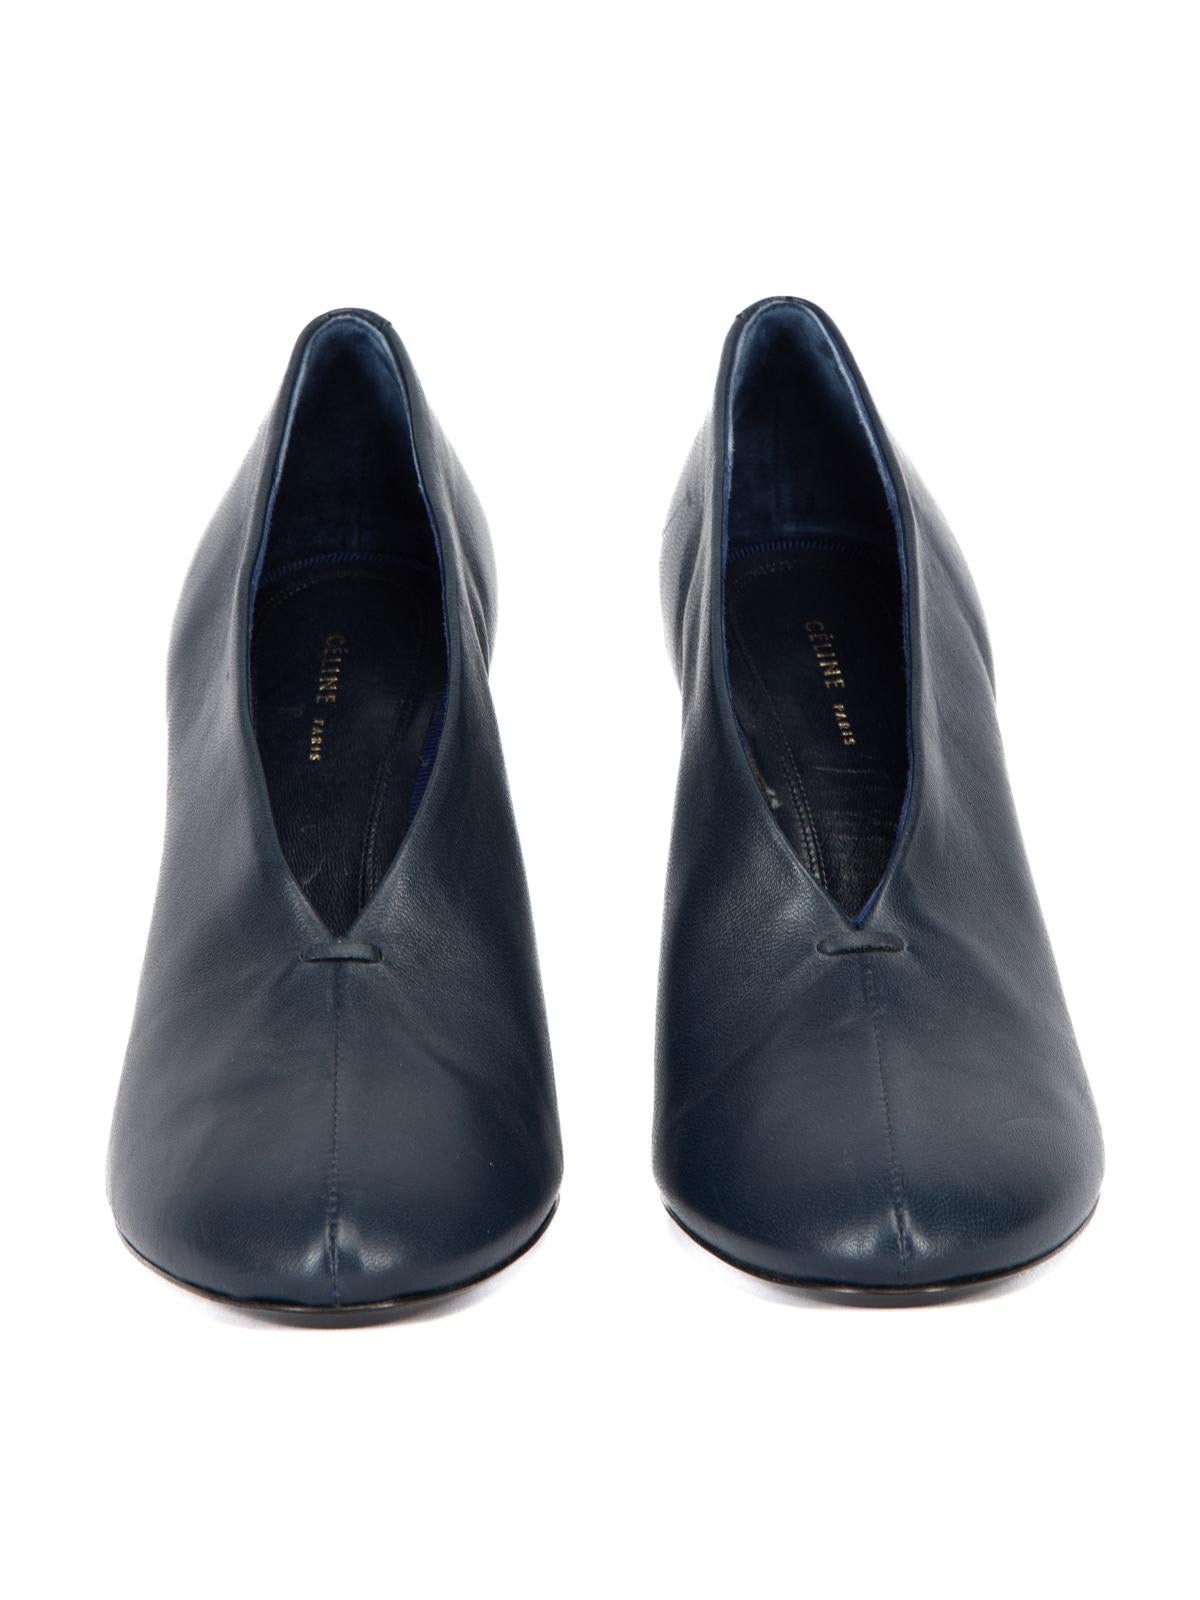 Céline Women's Navy Blue Leather Closed Toe Booties In Excellent Condition For Sale In London, GB